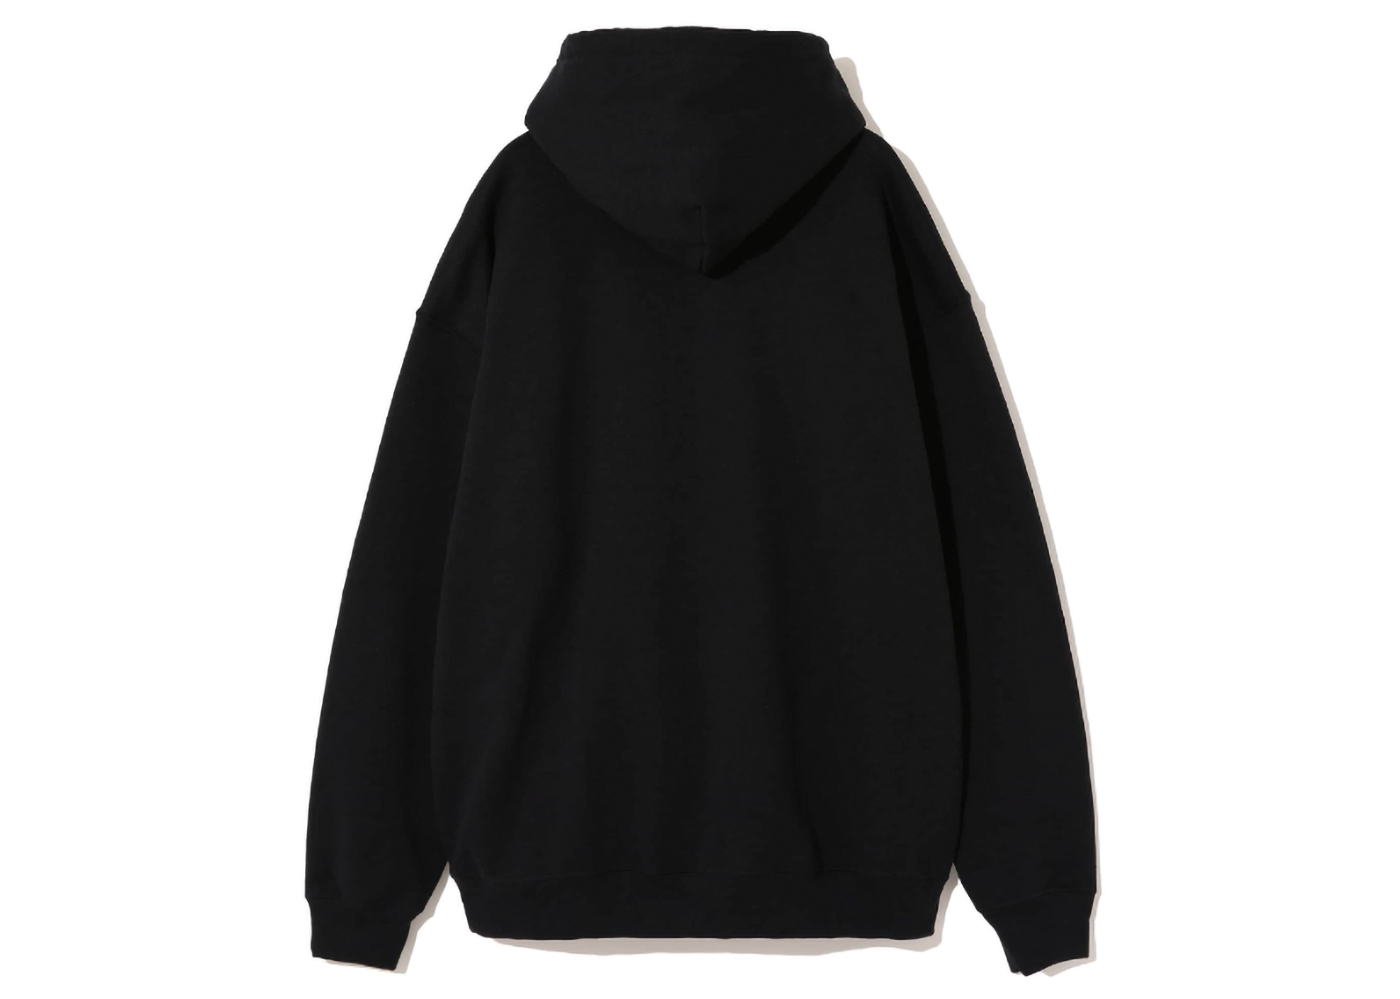 Undercover x Verdy Wasted Youth Hoodie Black Men's - SS23 - US